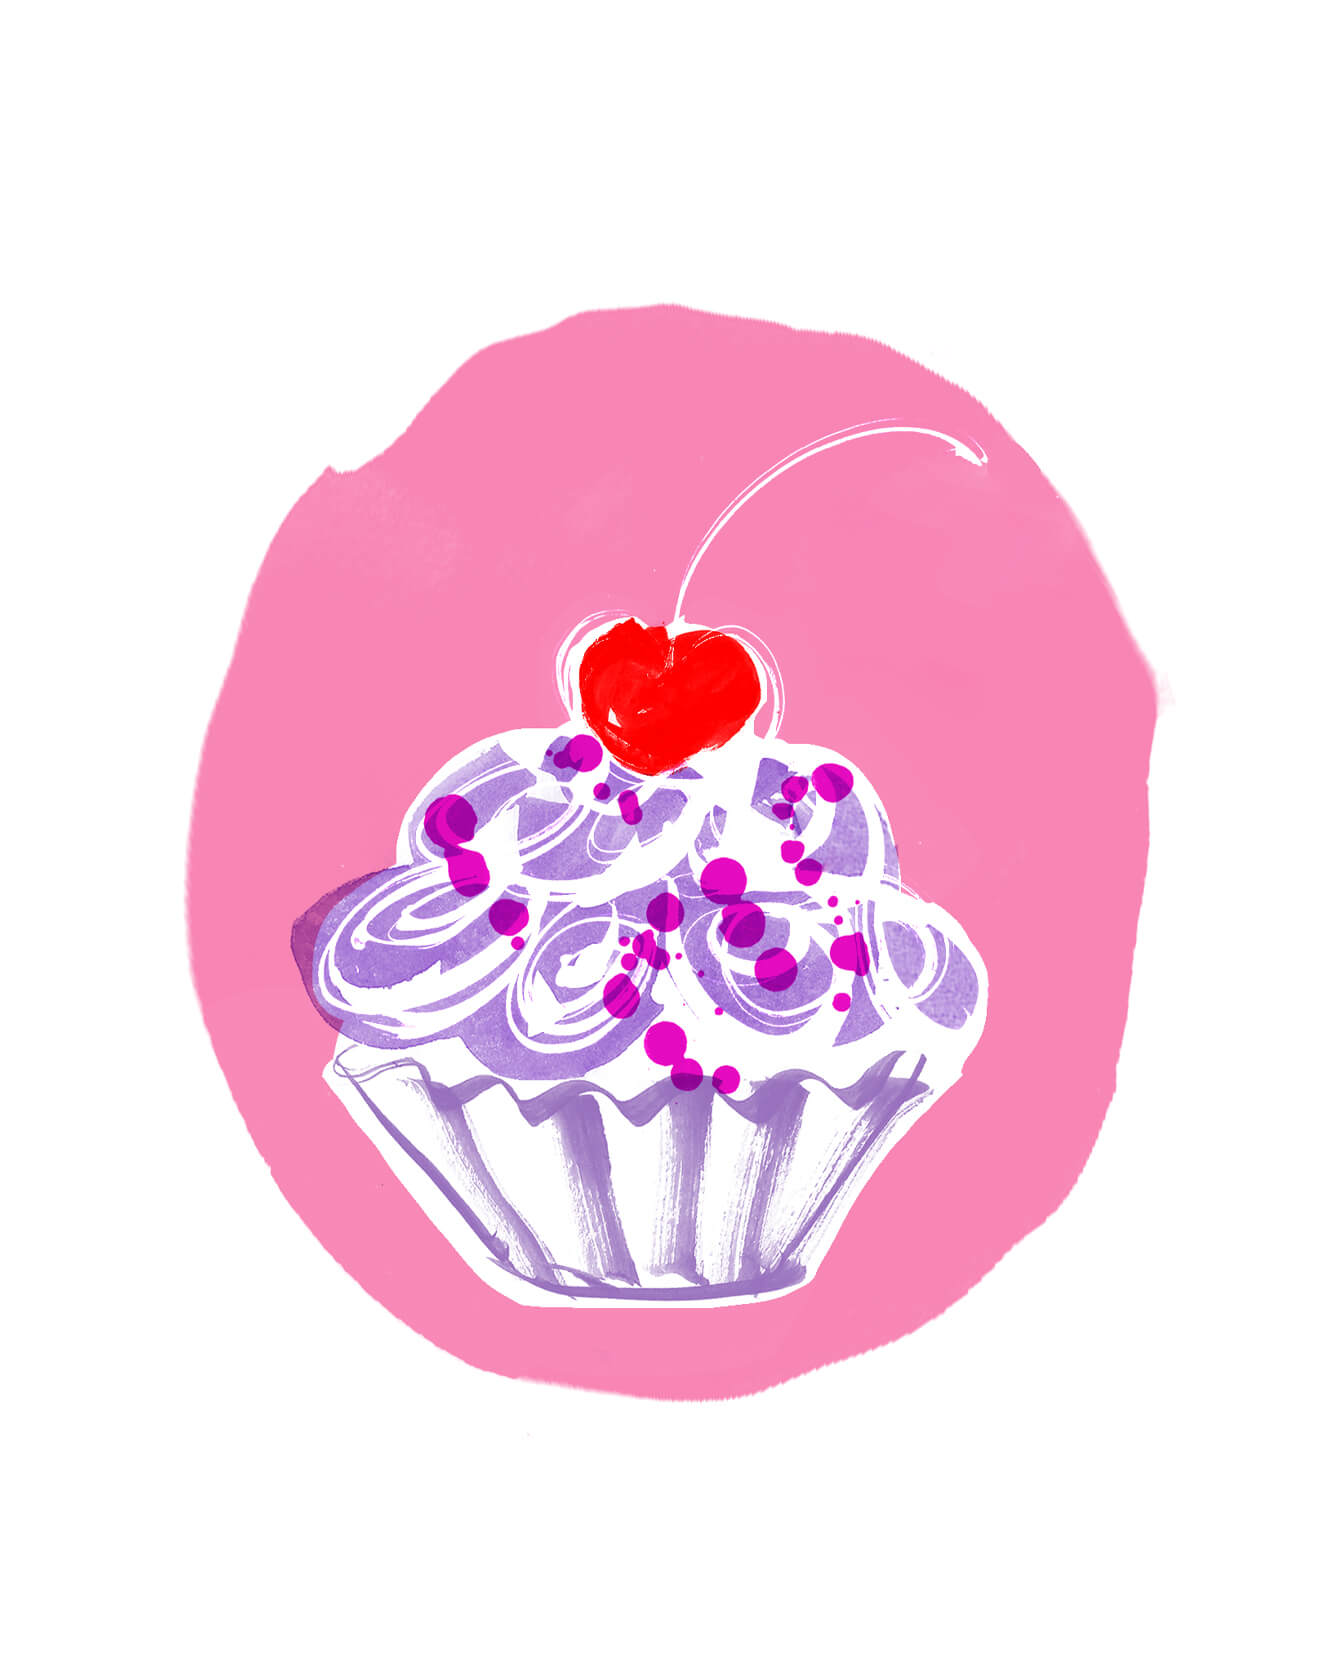 Food illustration of cakes and desserts in hand painted brush strokes and bright colours and clashing pinks.